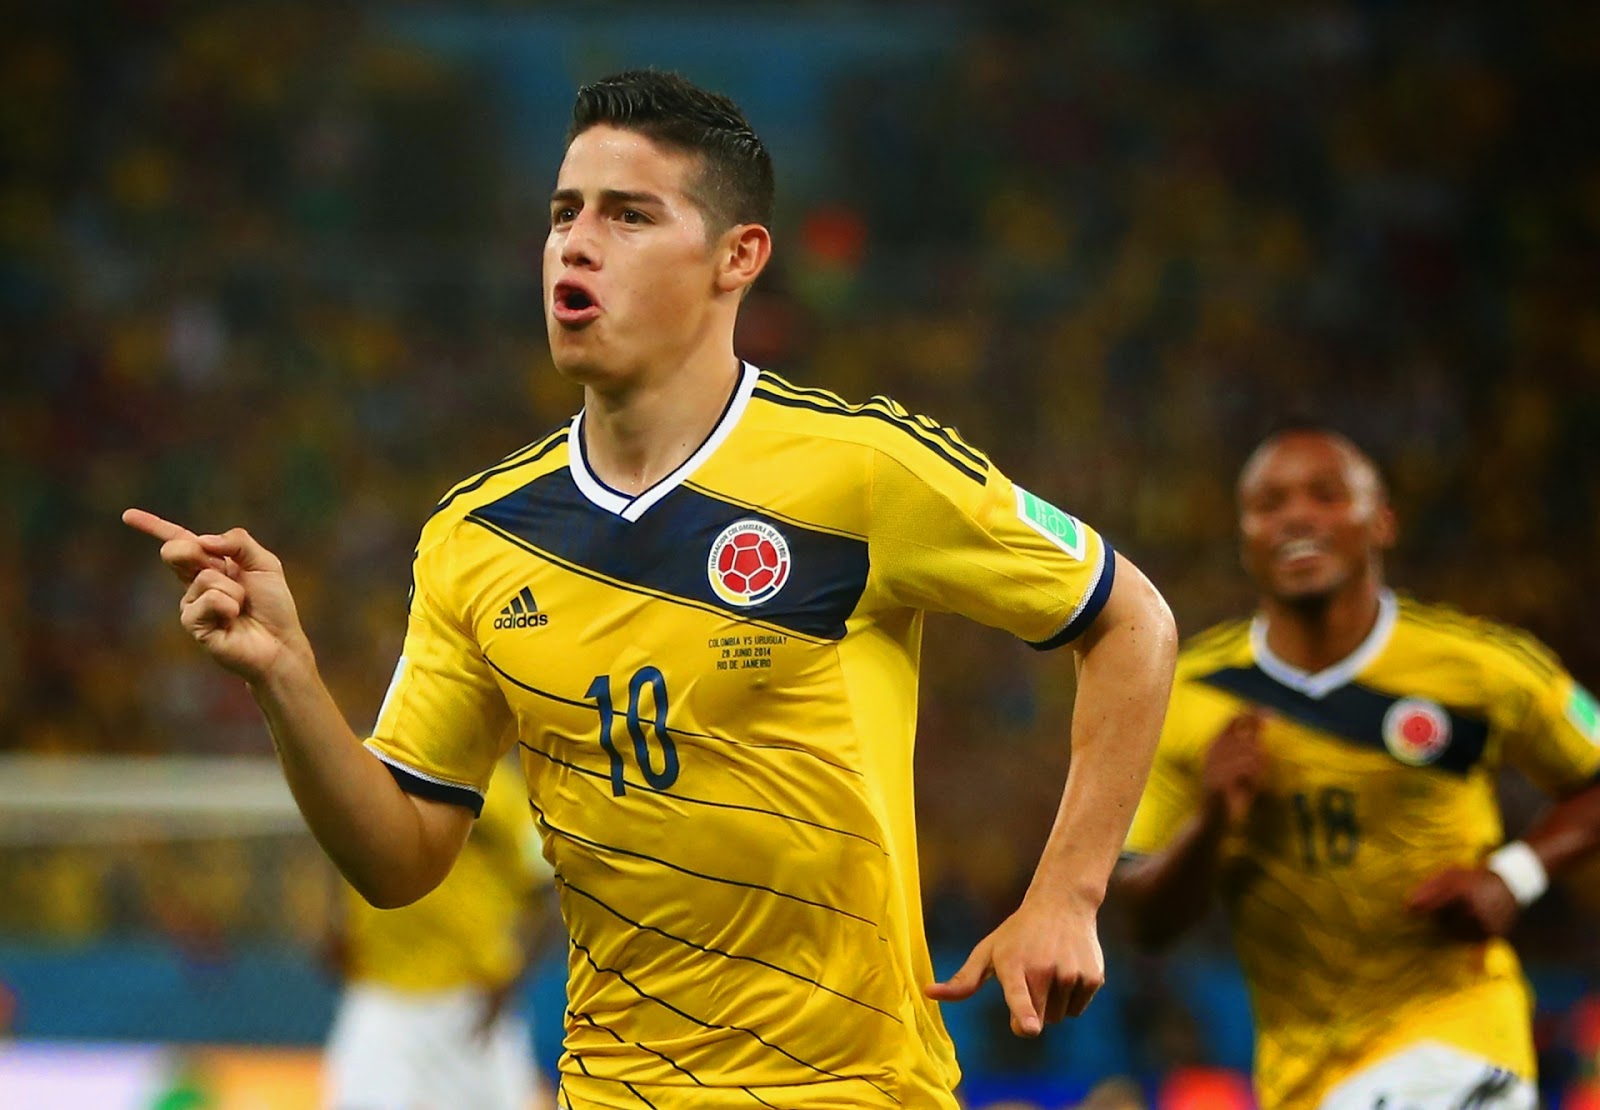 James Rodriguez Of Colombia At World Cup Wallpaper HD